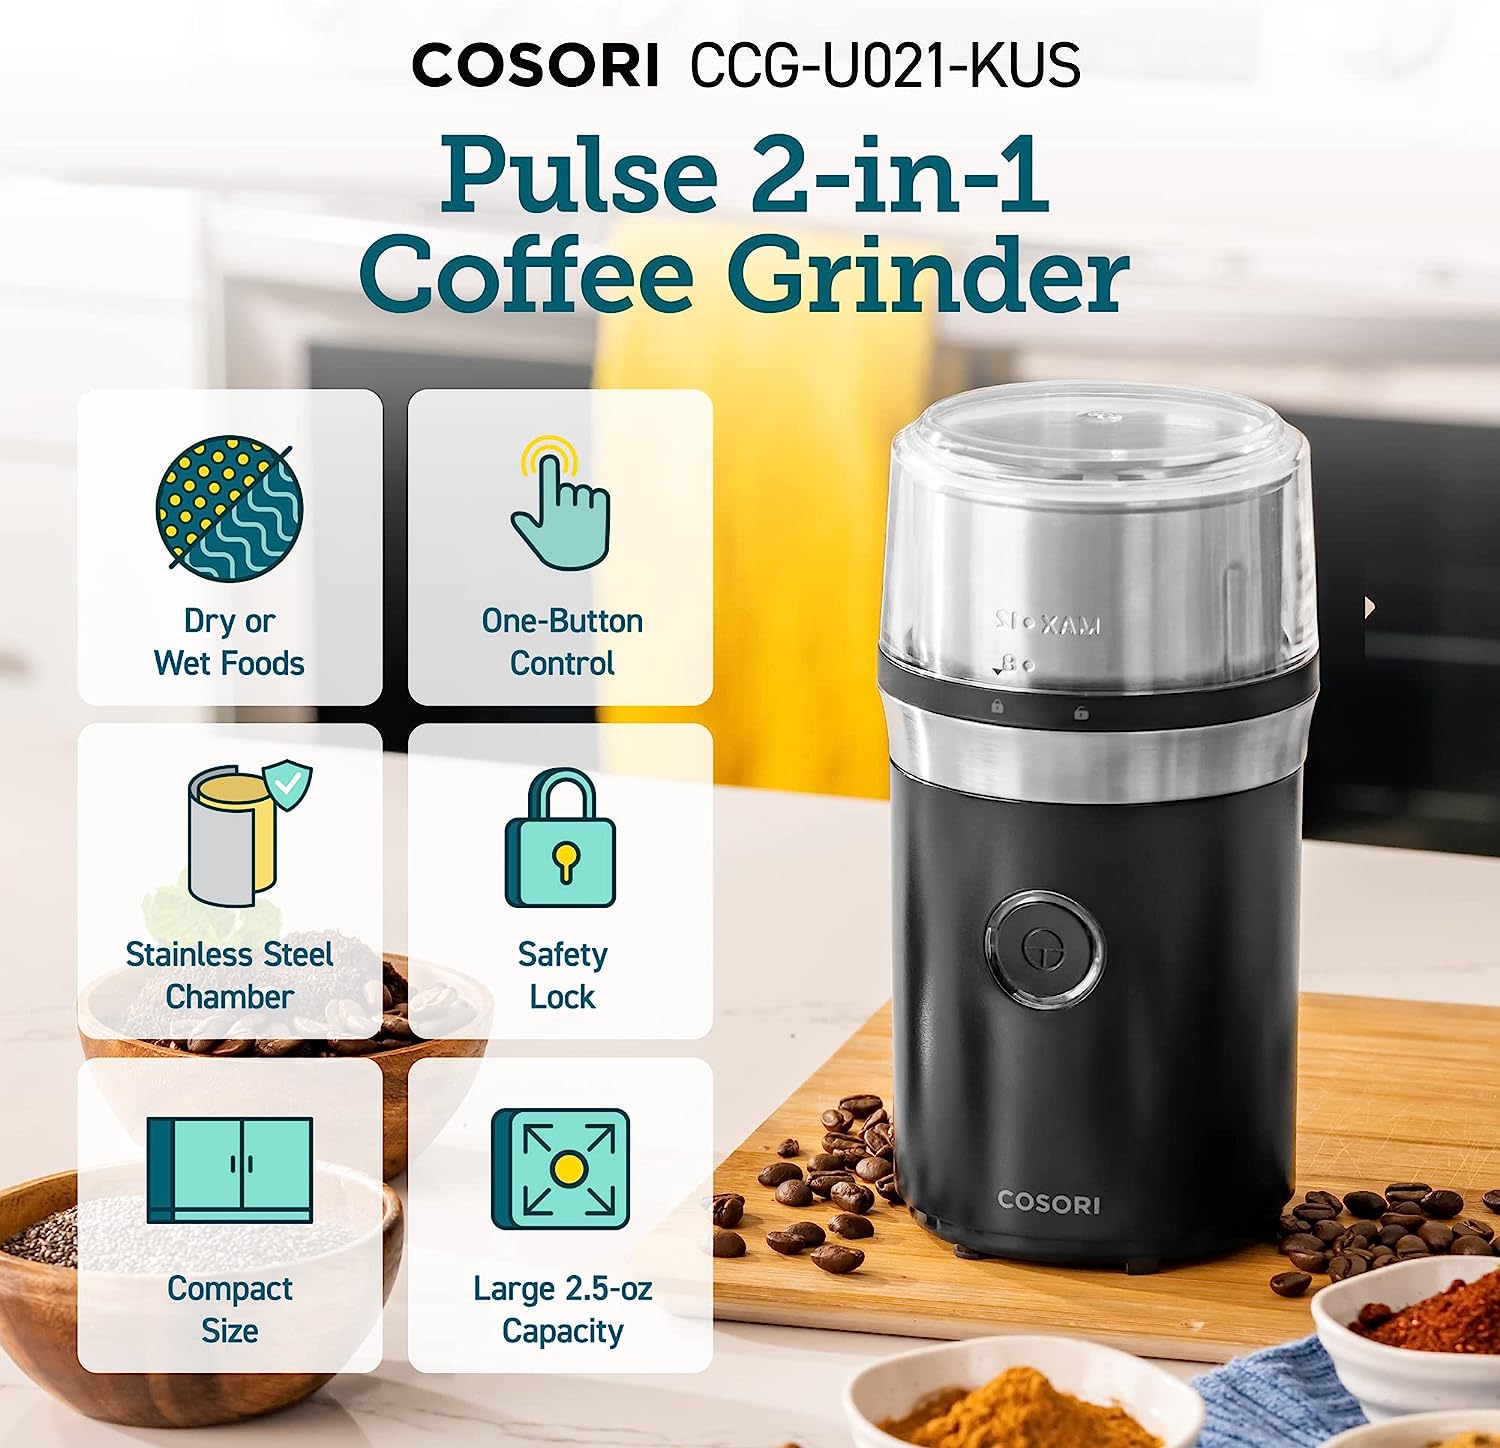 SHARDOR Coffee Grinder Electric, Spice Grinder Electric, Herb Grinder,  Grinder for Coffee Bean Spices and Seeds with 2 Removable Stainless Steel